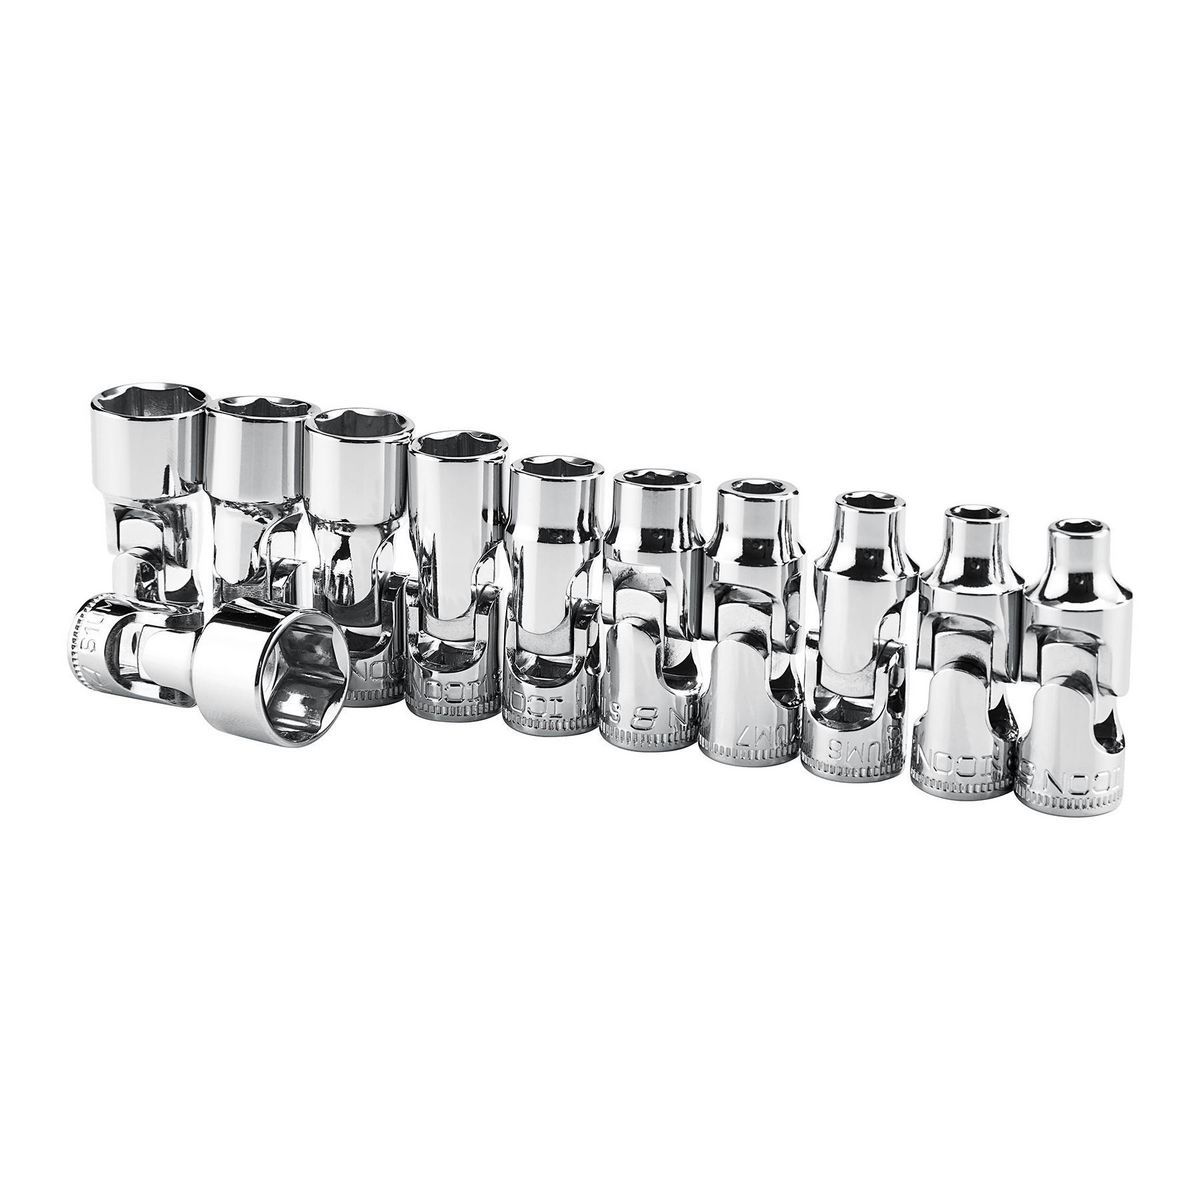 1/4 in.  Drive Metric Professional Universal Joint Shallow Socket Set